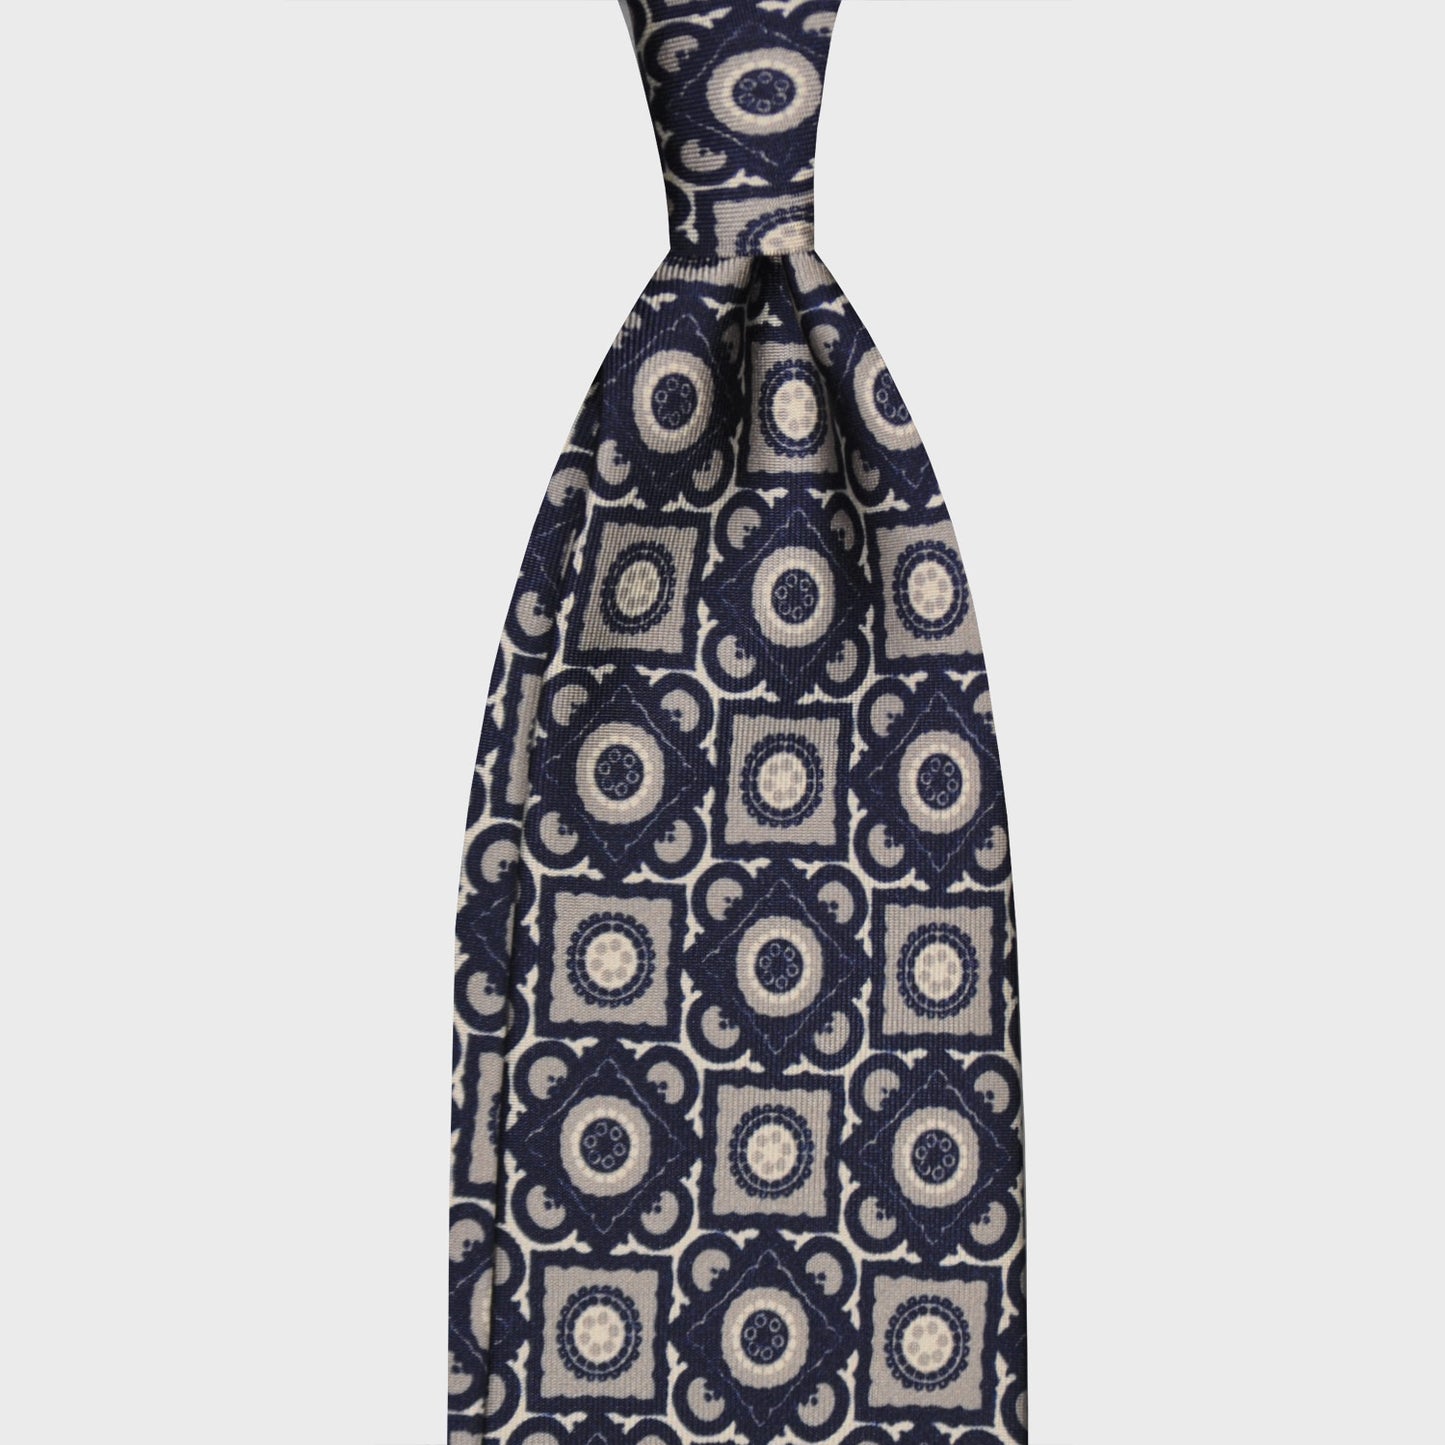 Load image into Gallery viewer, F.Marino Silk Tie 3 Folds Vintage Geometric Pattern Navy Blue-Wools Boutique Uomo
